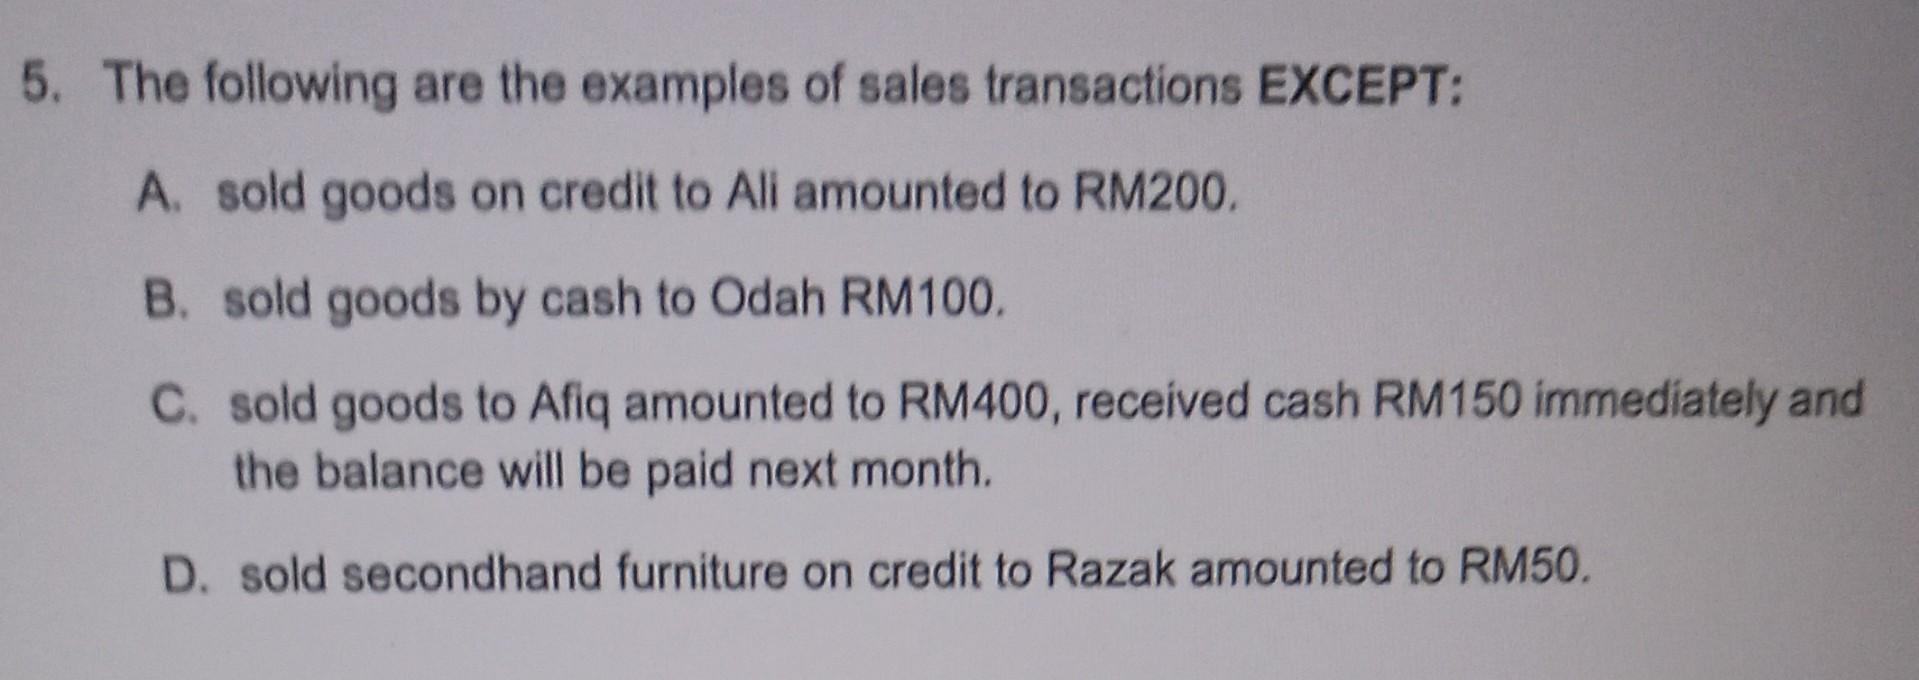 5. The following are the examples of sales transactions EXCEPT: A. sold goods on credit to Ali amounted to RM200. B. sold goo